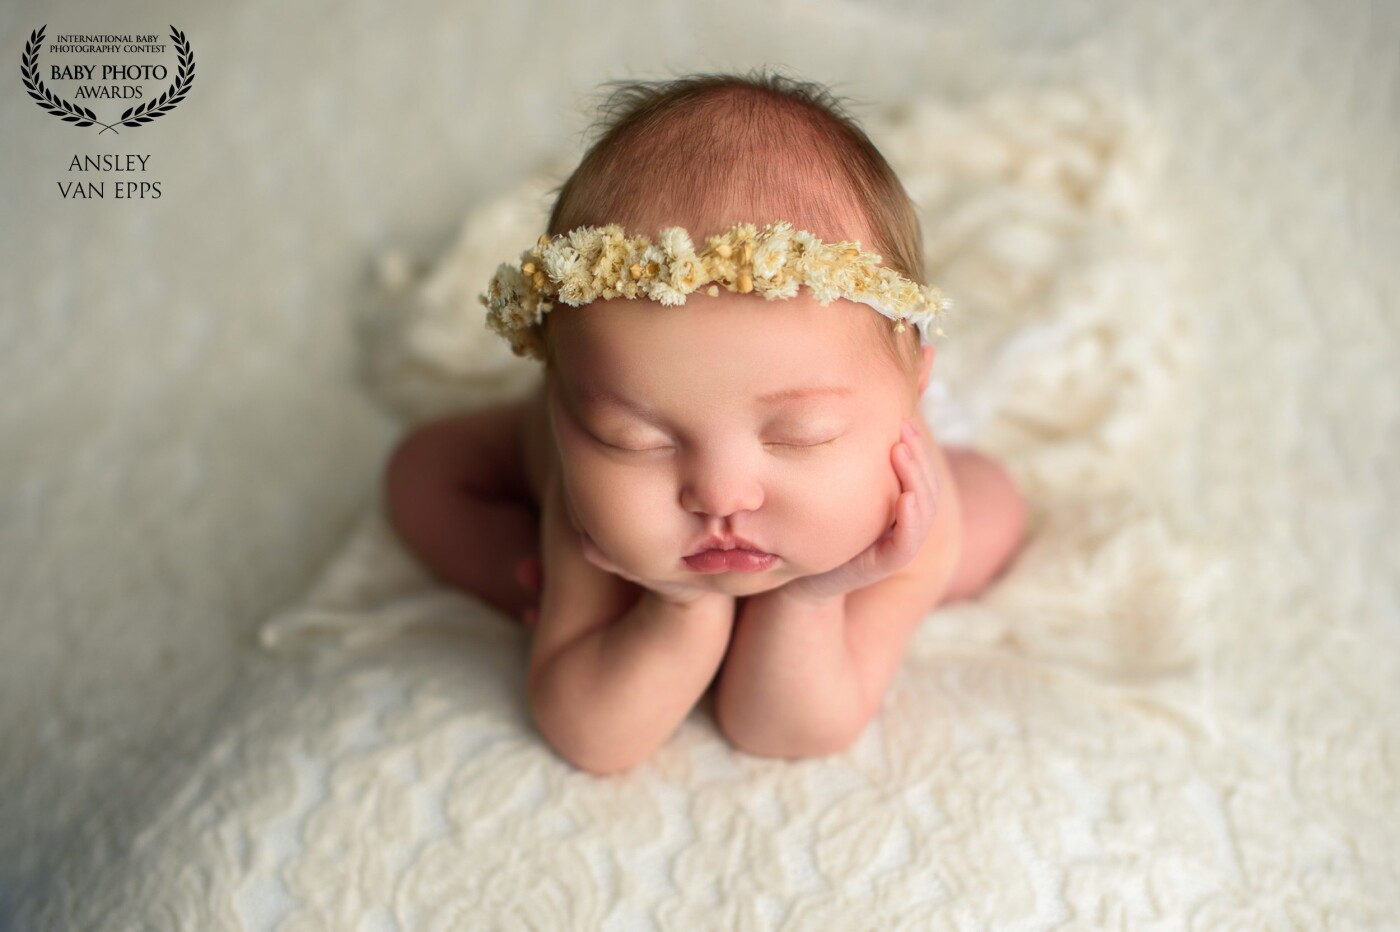 Beautiful Maxine was born on the Fourth of July and had stunning cheeks I wanted to show off! I love her froggy pose lifting up her beautiful round cheeks.